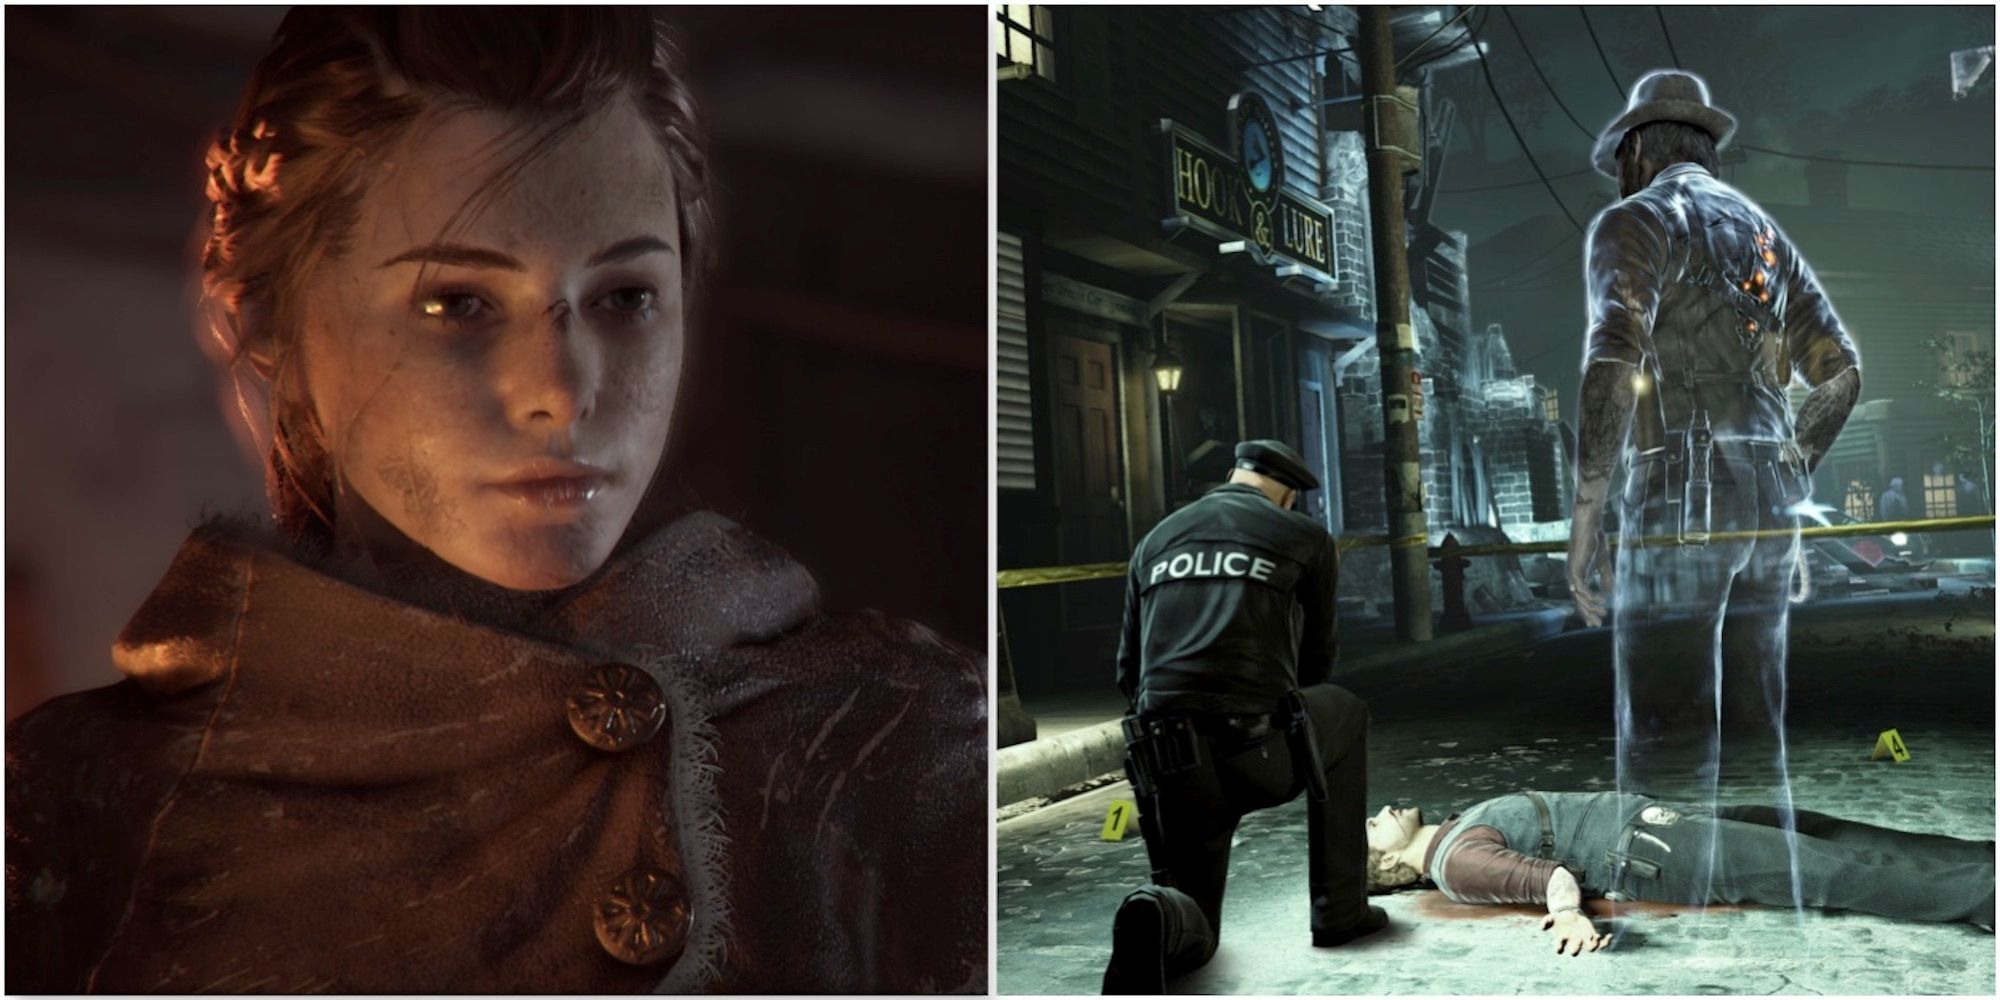 Amicia de Rune in A Plague Tale Innocence and a cutscene featuring characters in Murdered Soul Suspect